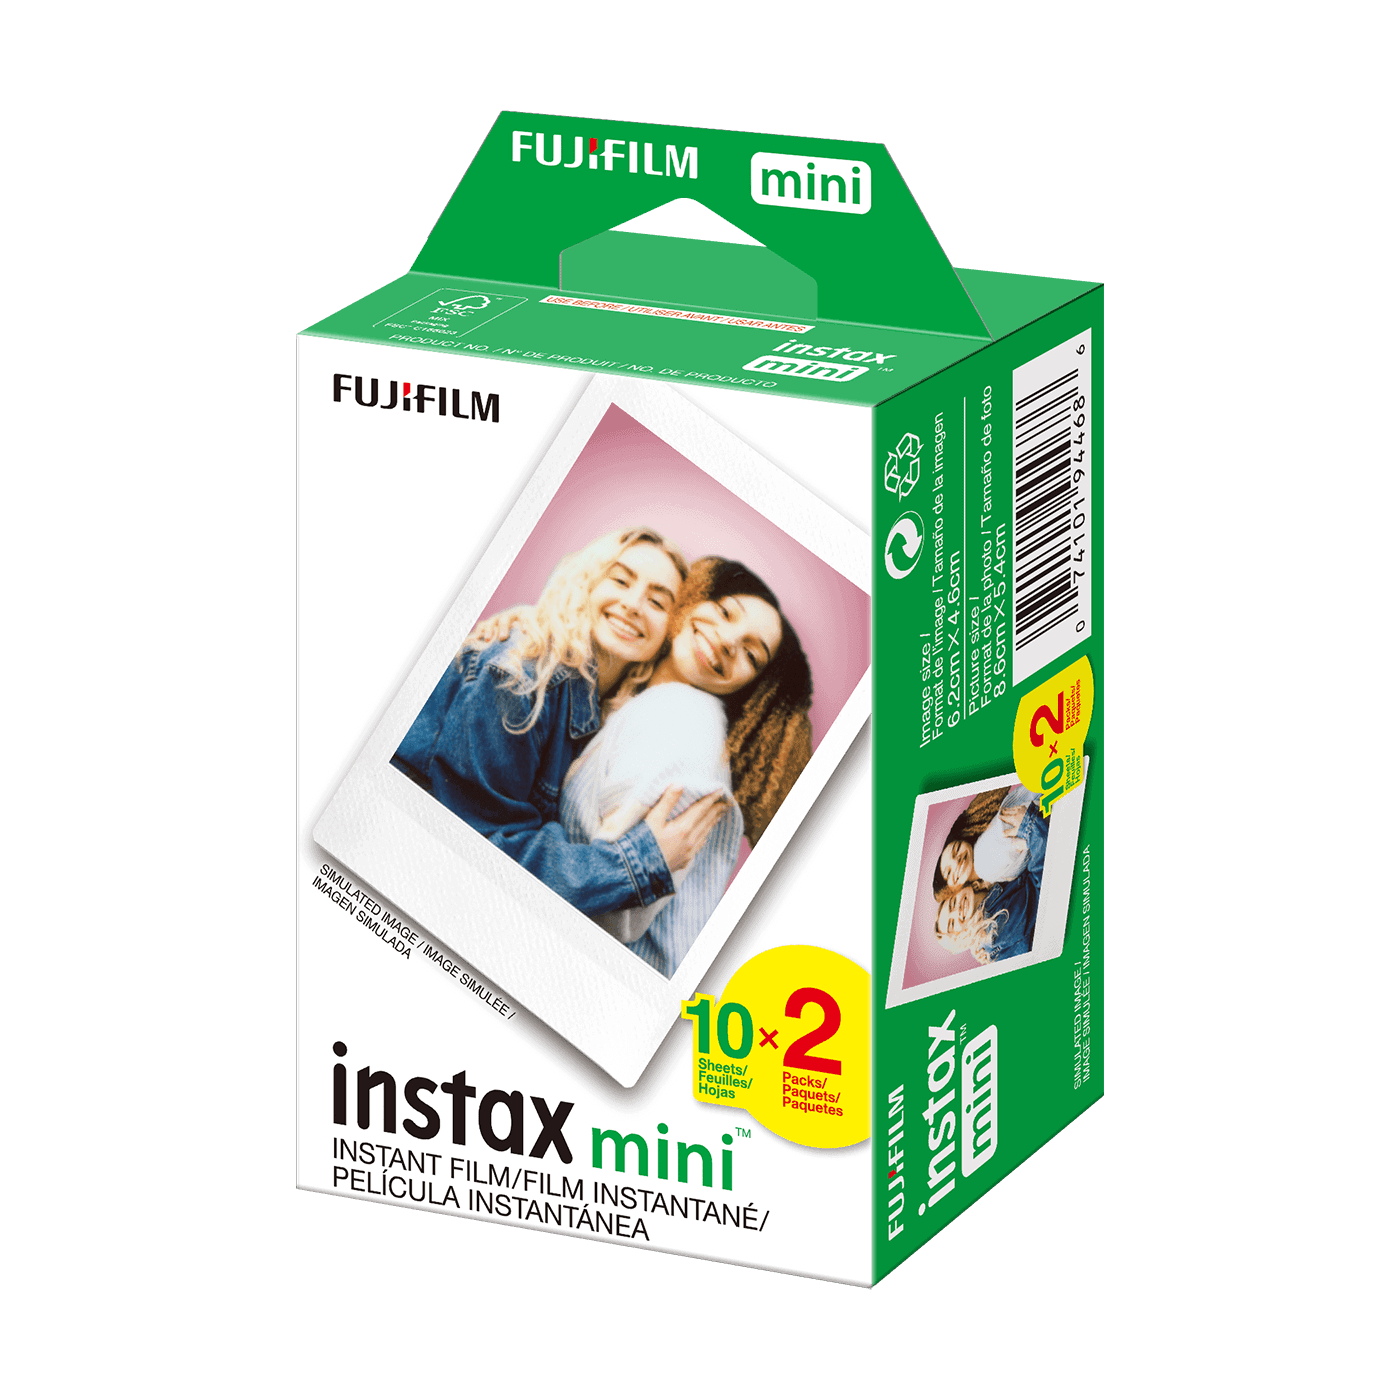 Mini Instant Film, 2 x 10 sheets sheets) – The Couple Book